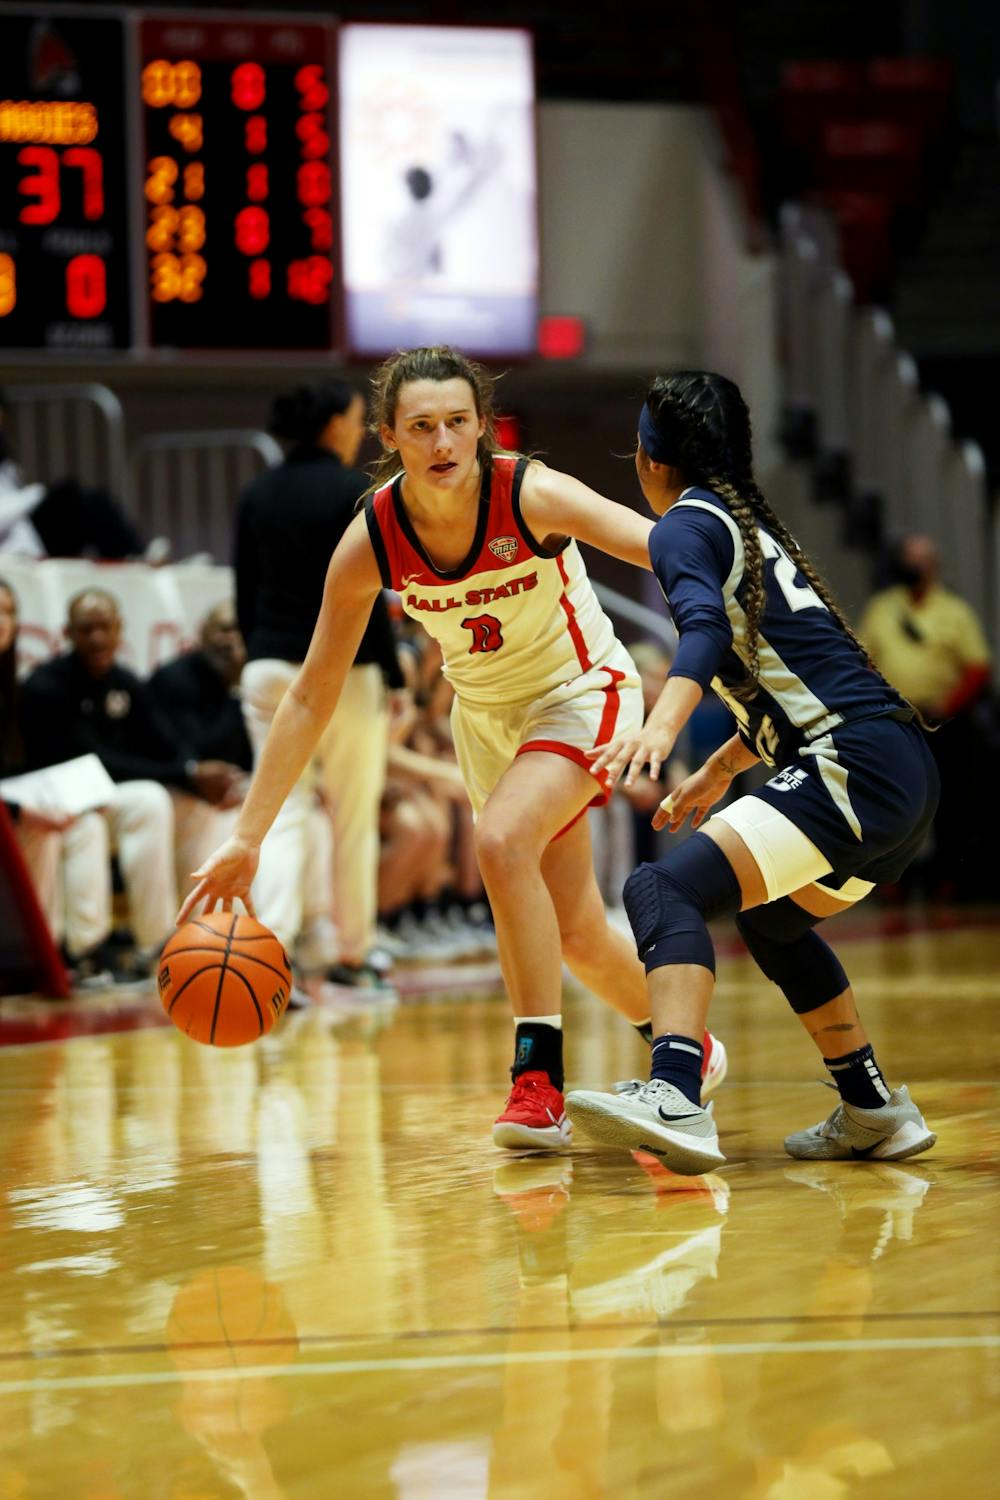 Ball State Women's Basketball can’t find momentum, fall to Akron